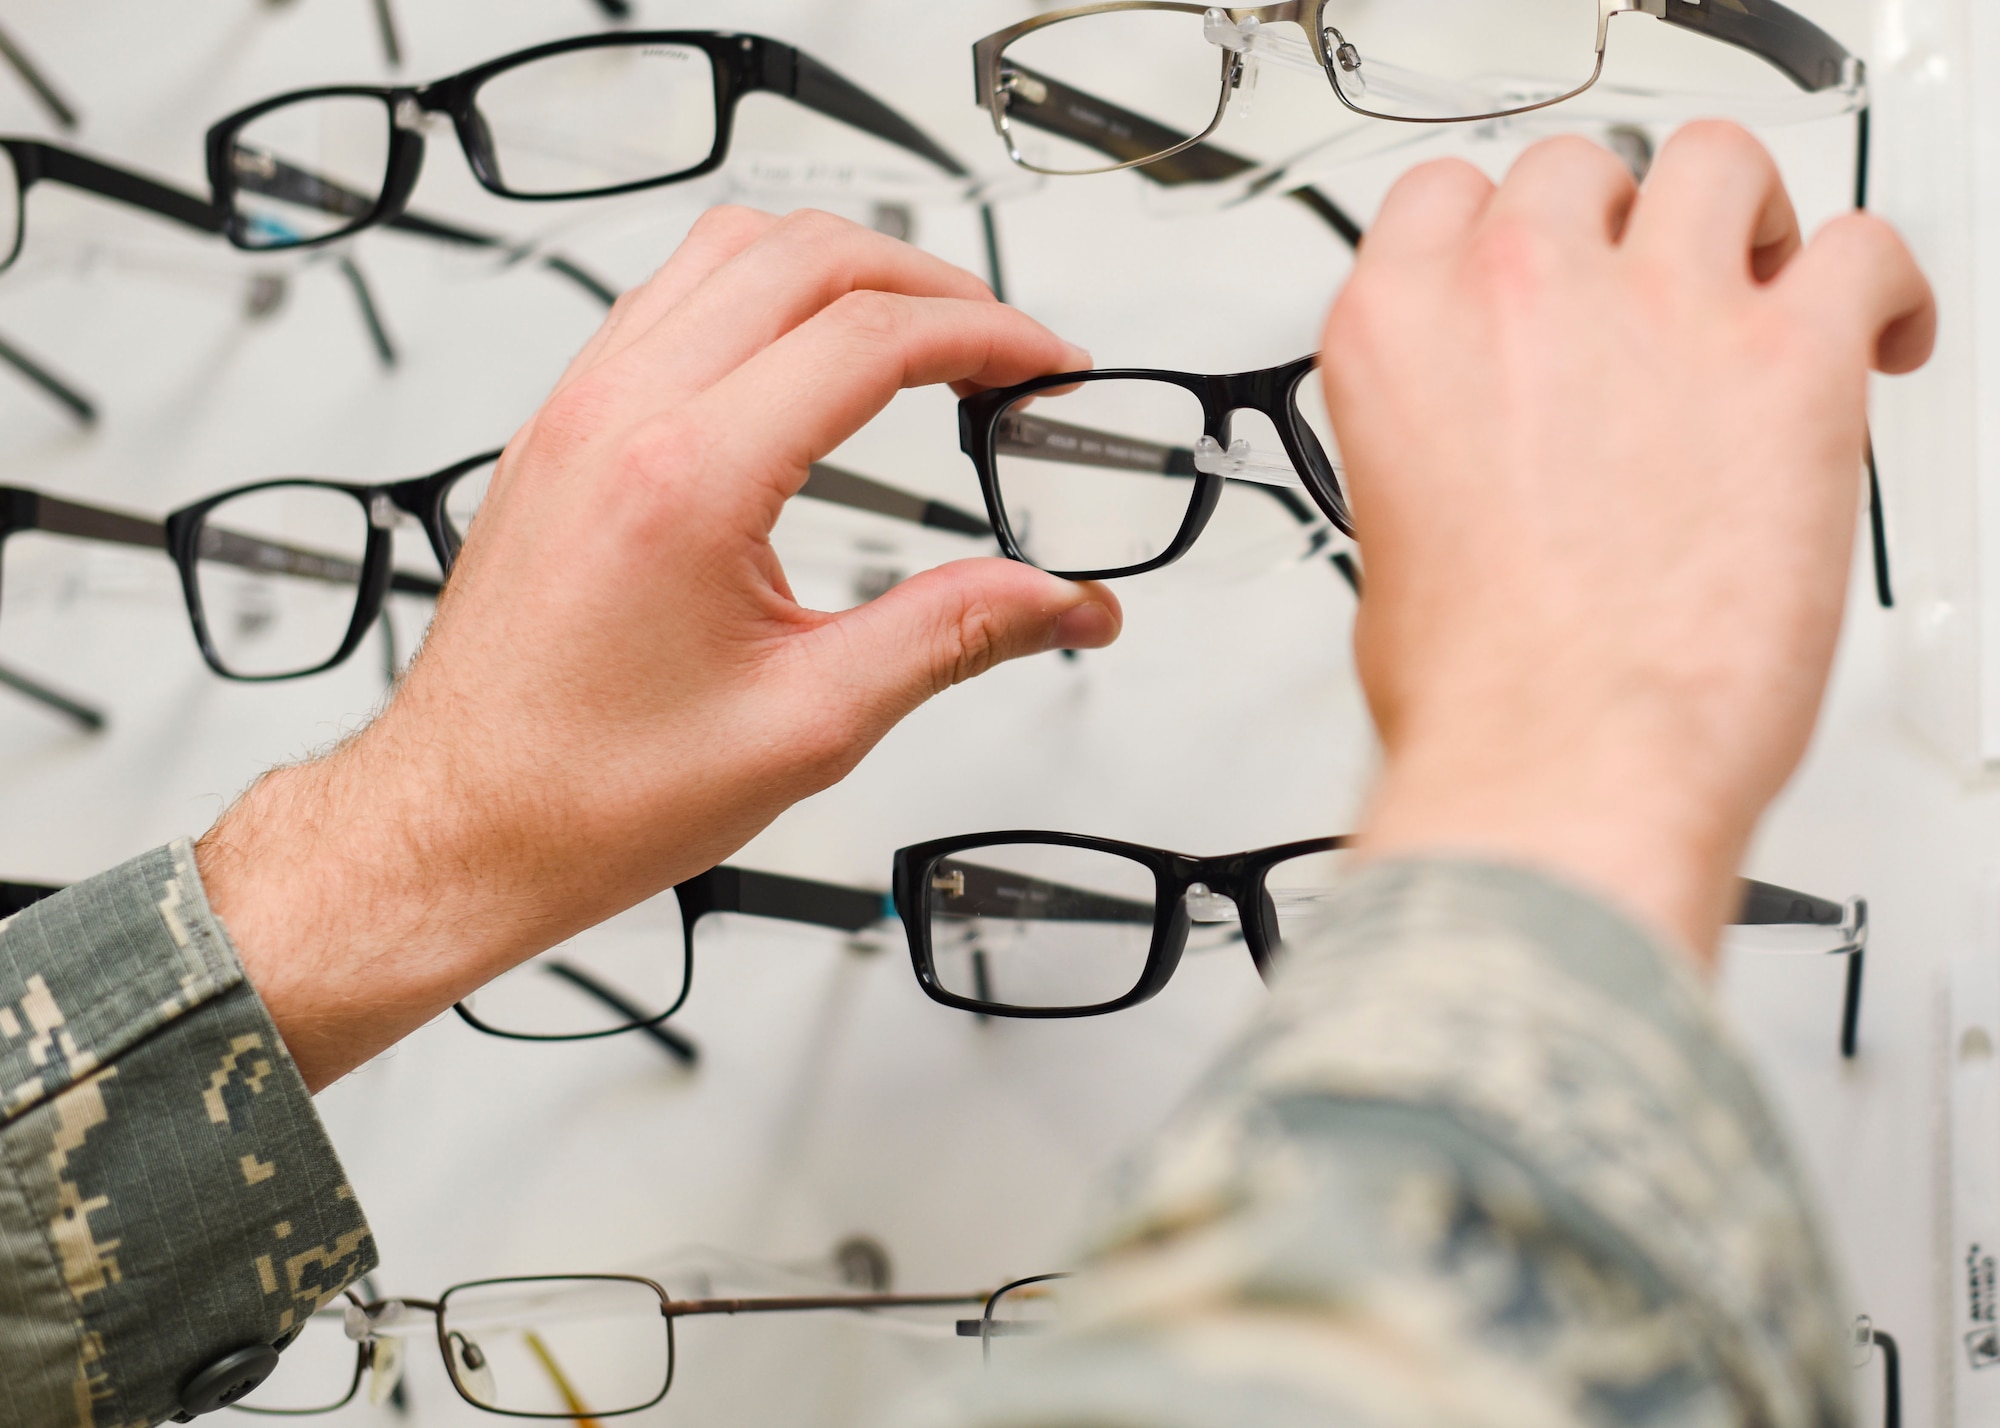 U.S. Air Force Staff Sgt. Jordan Cutaia, 325th Medical Group optometry technician, picks out glasses June 6, 2018 at Tyndall Air Force Base, Florida.